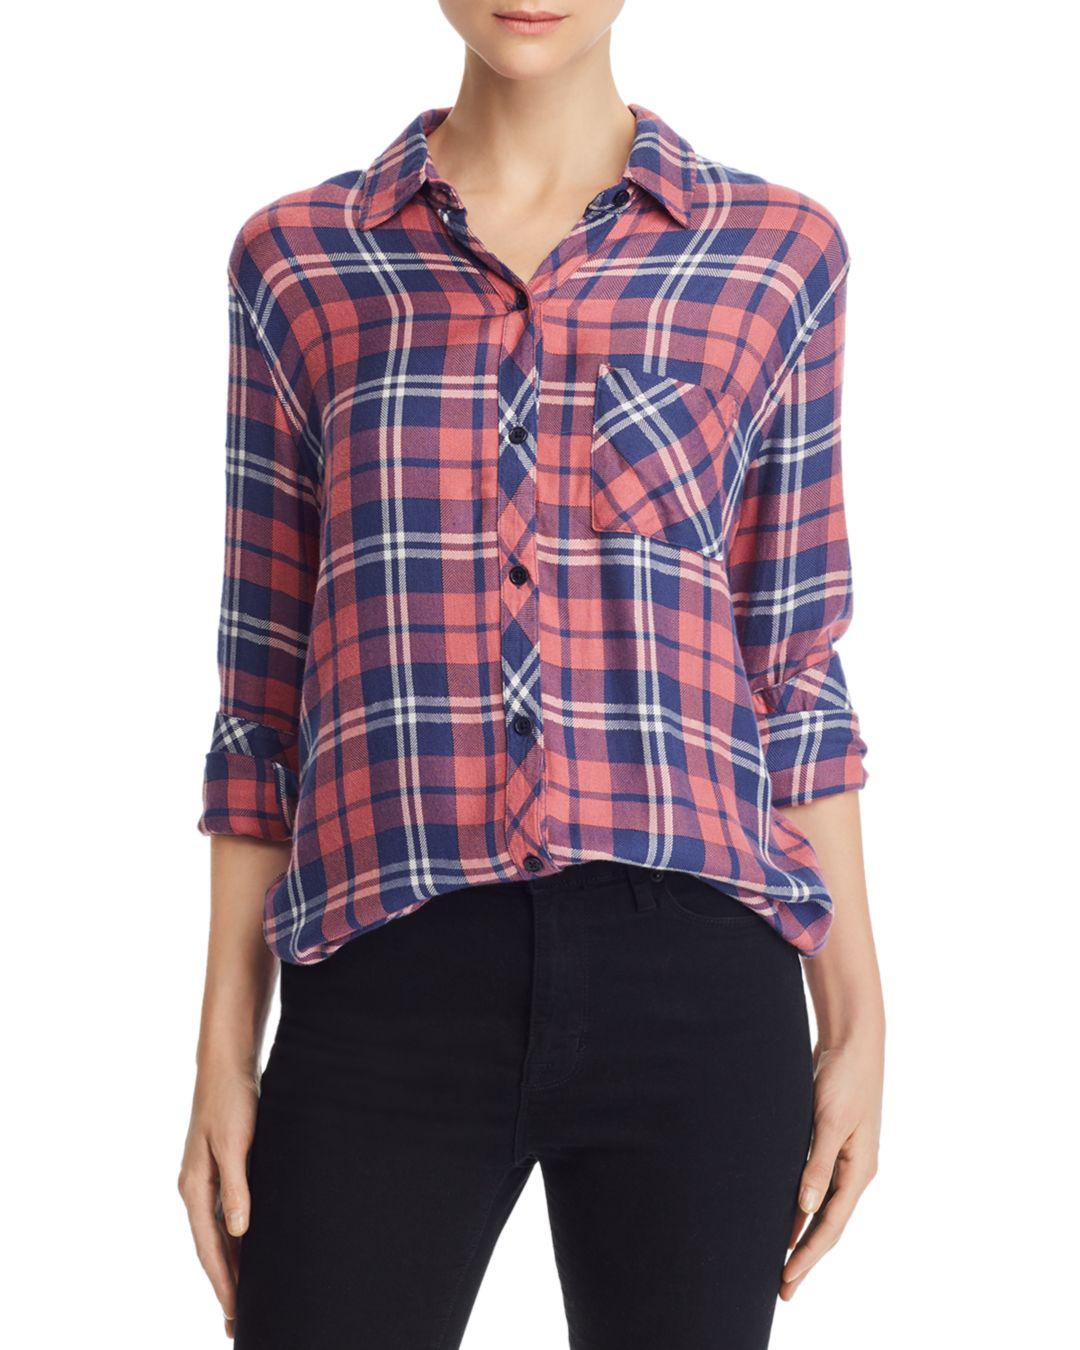 Lyst - Rails Hunter Plaid Button-down Long-sleeve Shirt in Red - Save 20%